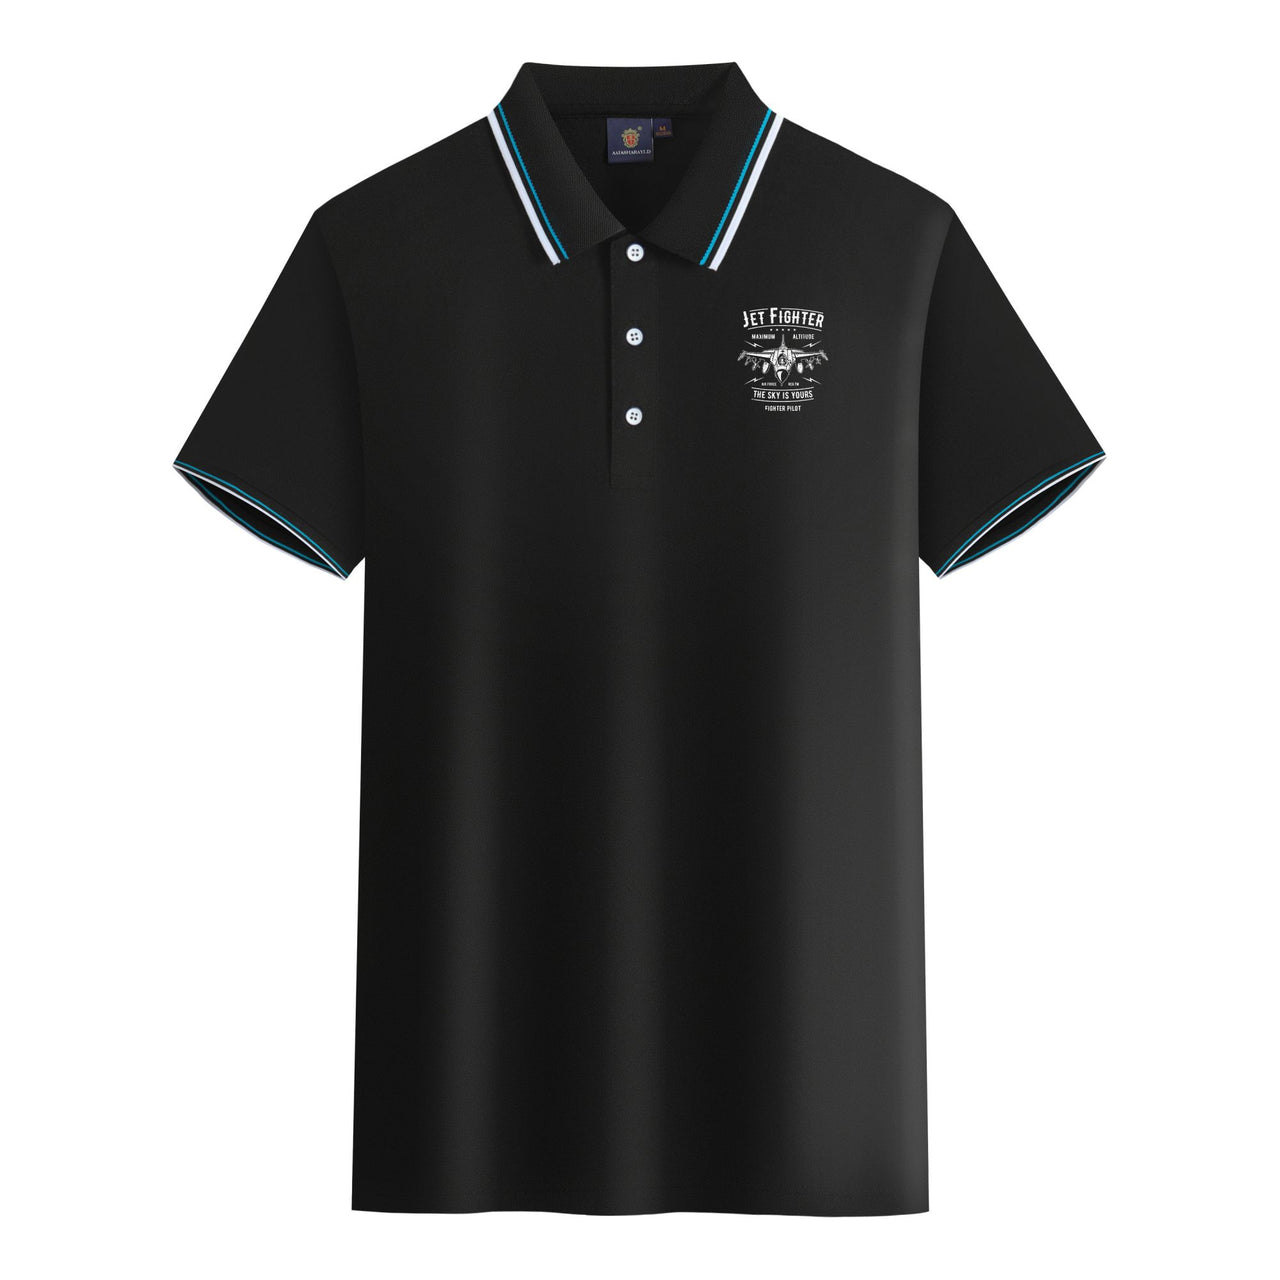 Jet Fighter - The Sky is Yours Designed Stylish Polo T-Shirts